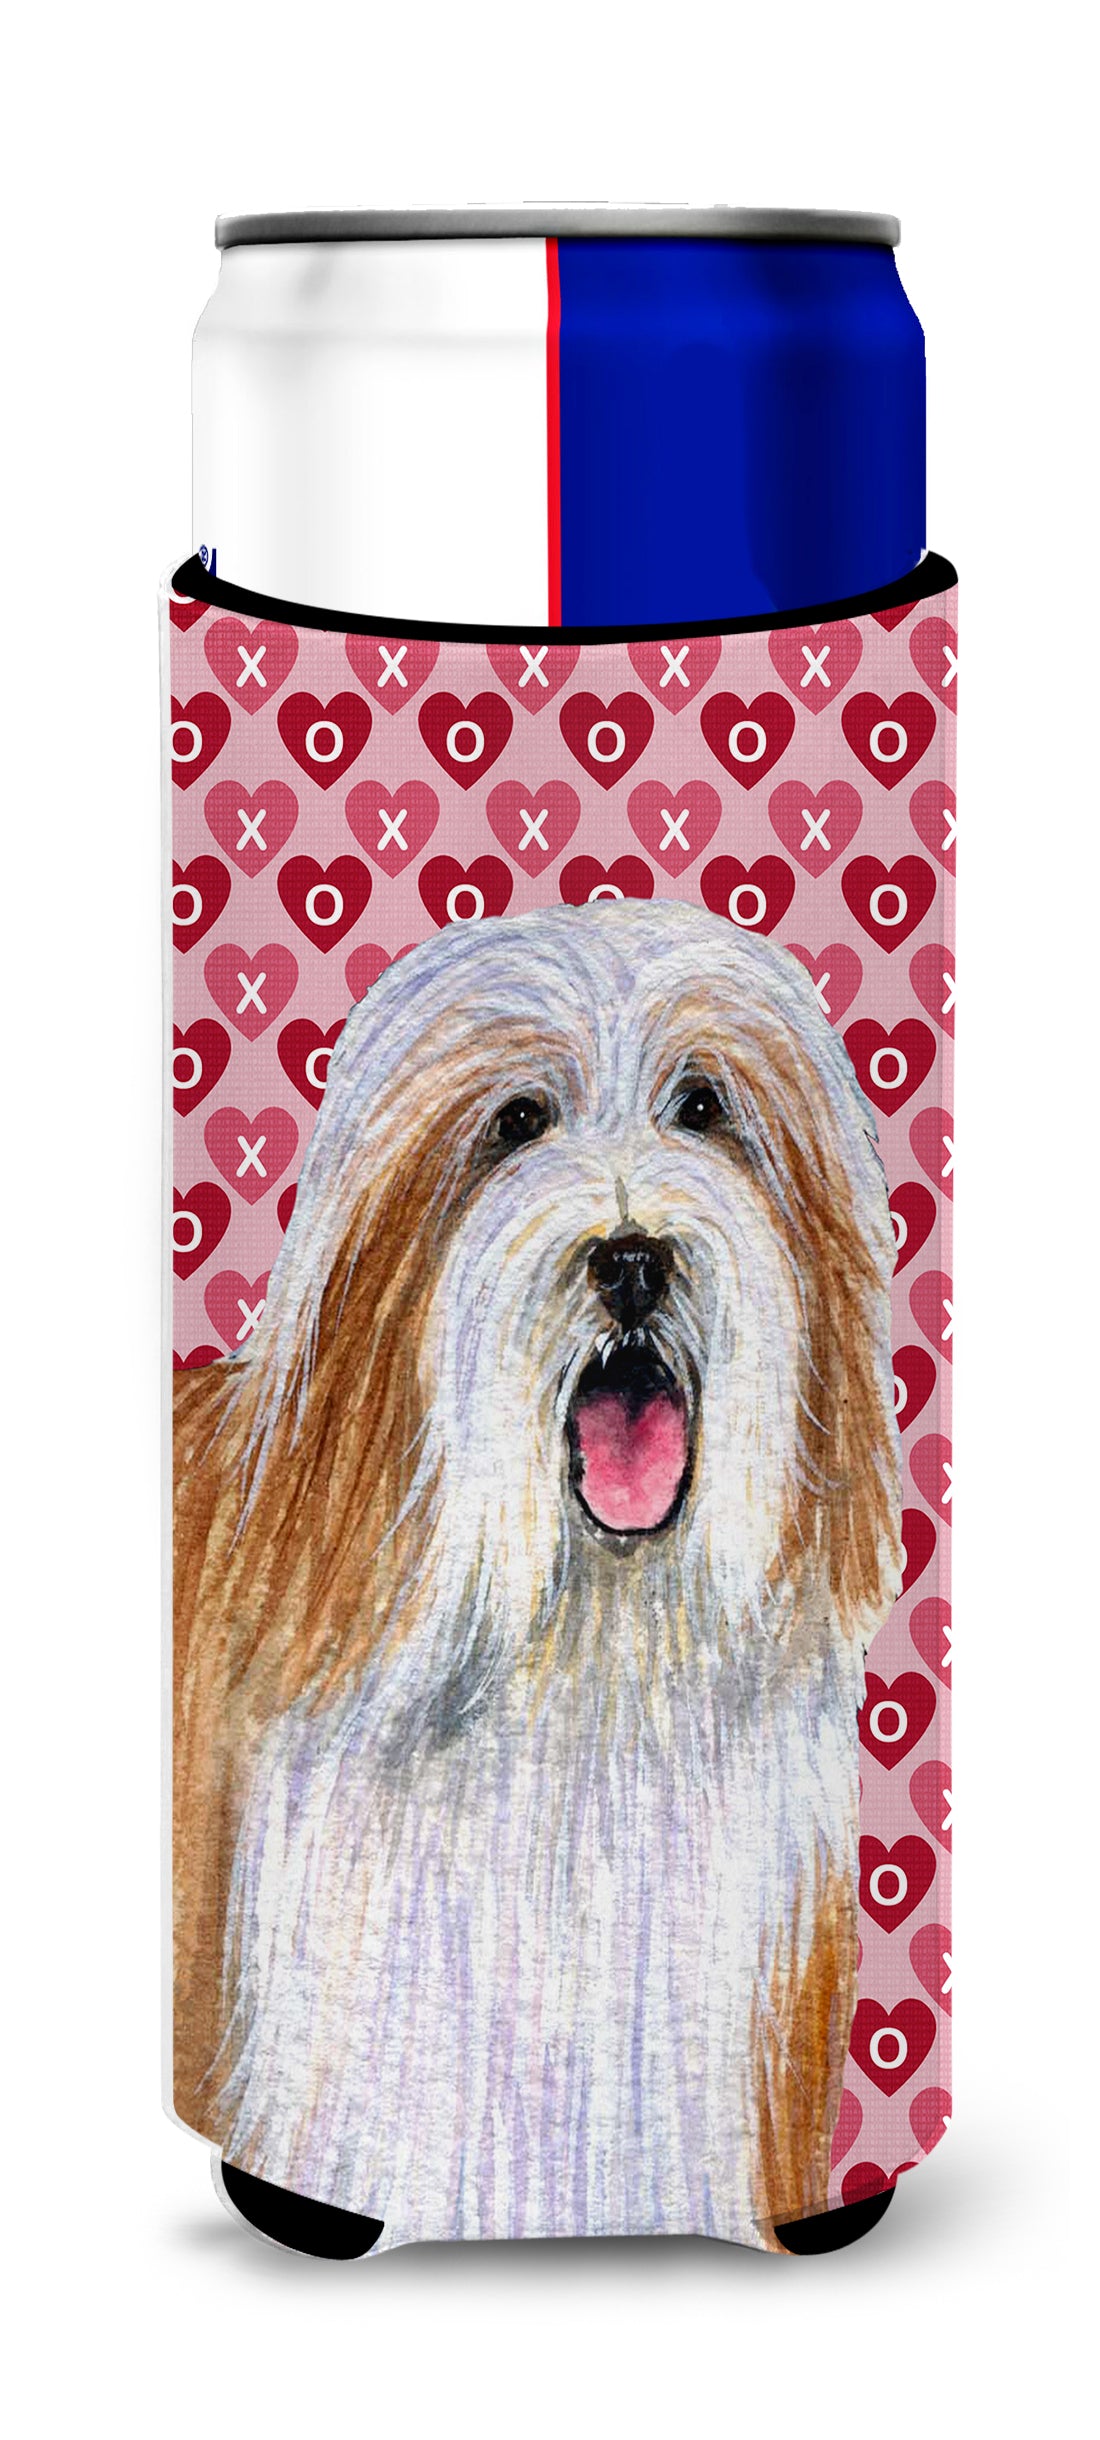 Bearded Collie Hearts Love and Valentine's Day Portrait Ultra Beverage Insulators for slim cans LH9150MUK.